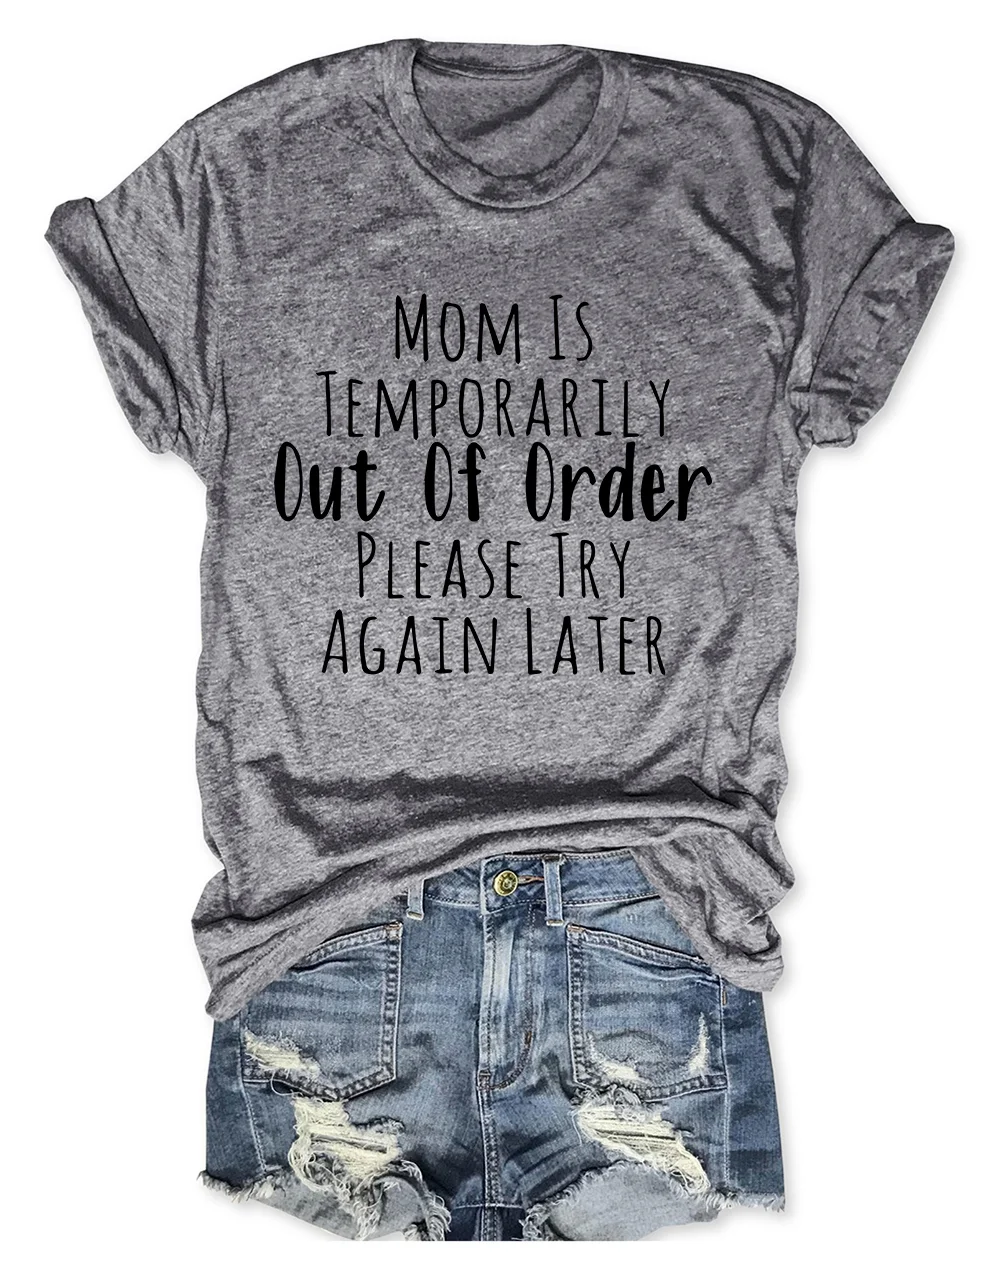 Mom Is Temporarily Out Of Order T-Shirt